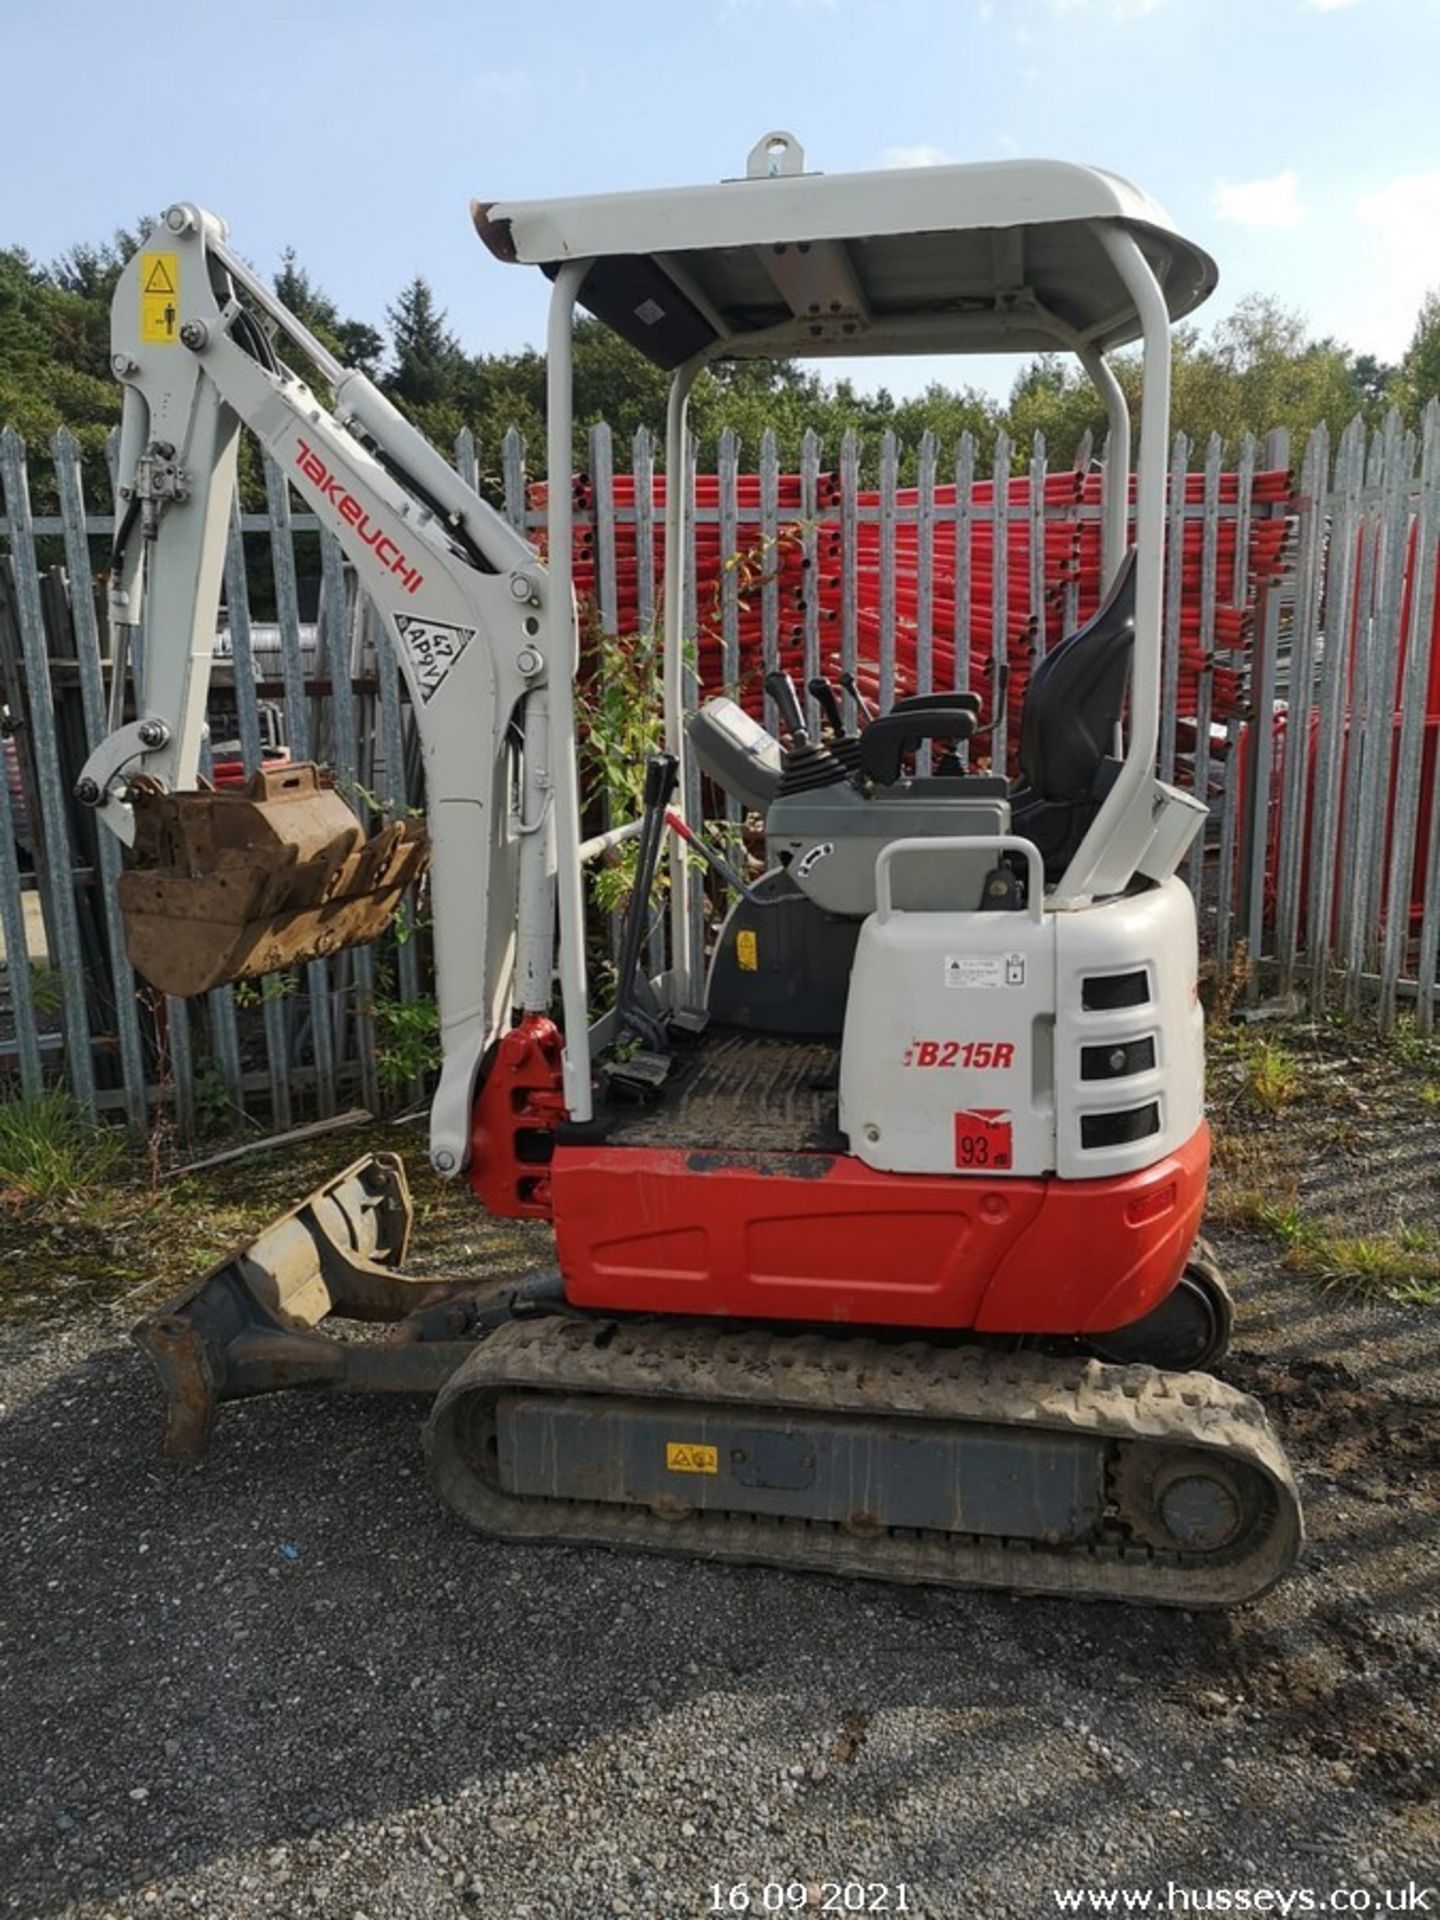 TAKEUCHI TB215R DIGGER C.W 2 BUCKETS 2017 EXPANDING TRACKS 2 SPEED TRACKING QUICK HITCH RTD - Image 4 of 5